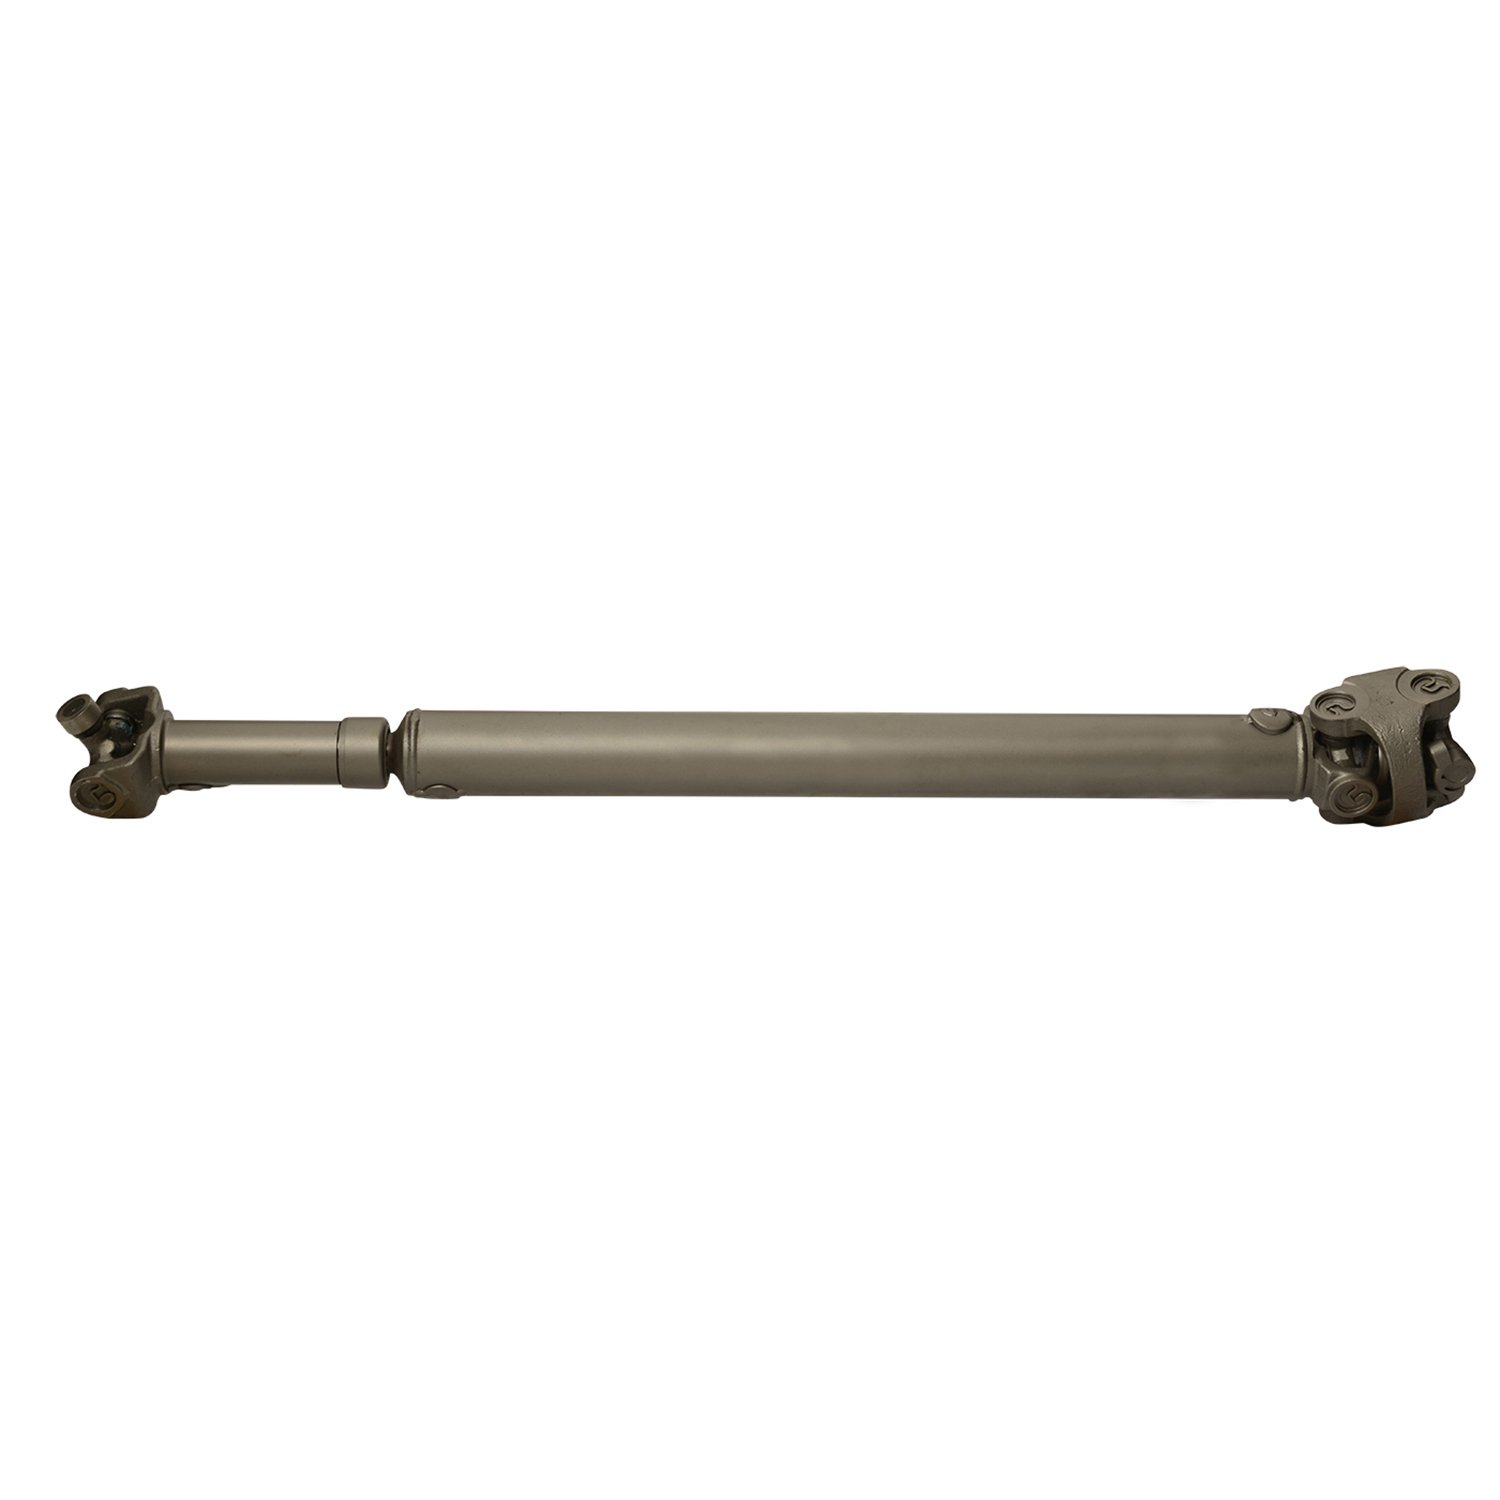 USA Standard ZDS9832 Rear Driveshaft, For Bronco, 30-1/16 in. Center-To-Center